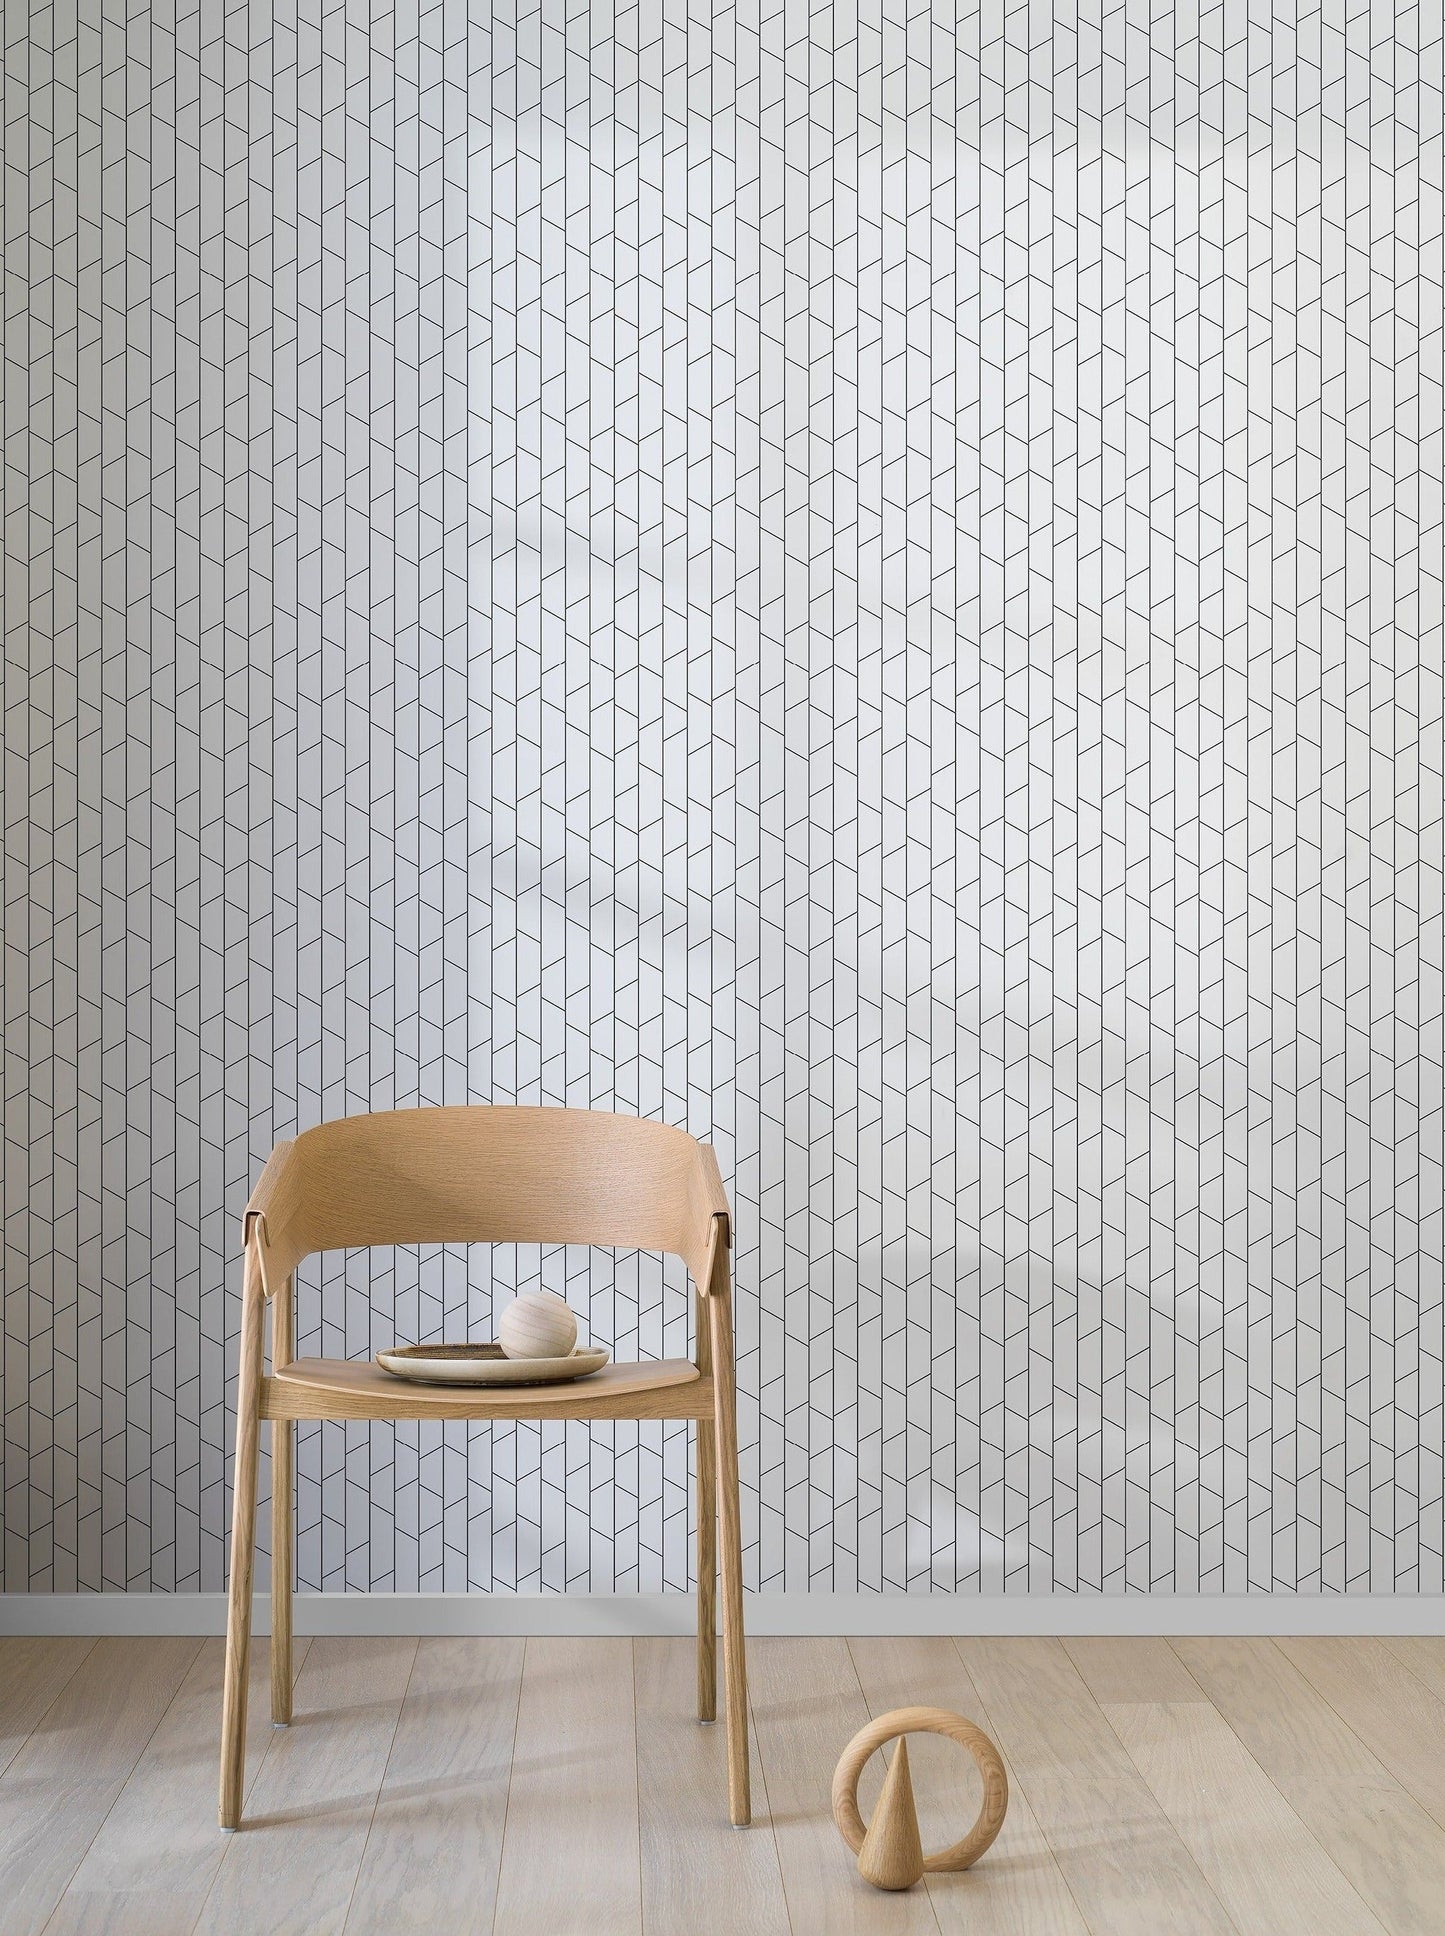 The bold simplicity of our Angle wallpaper in a black and white palette is inspired by the everyday lines seen around us, such as railings, facades, masts, and power lines.